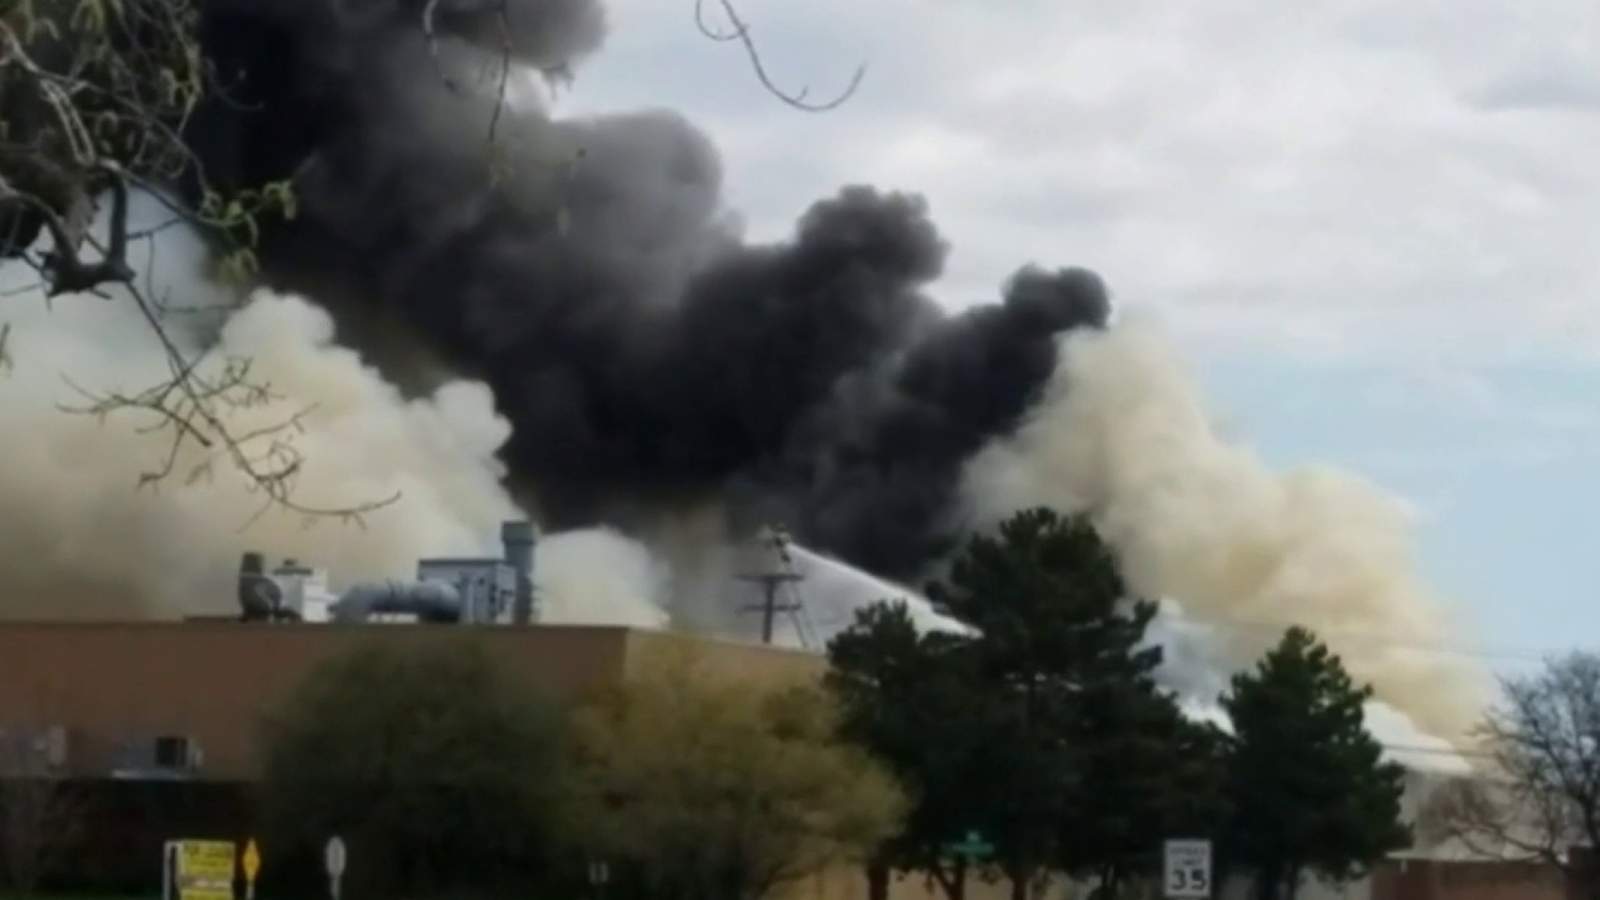 No injuries reported in massive industrial building fire in Troy